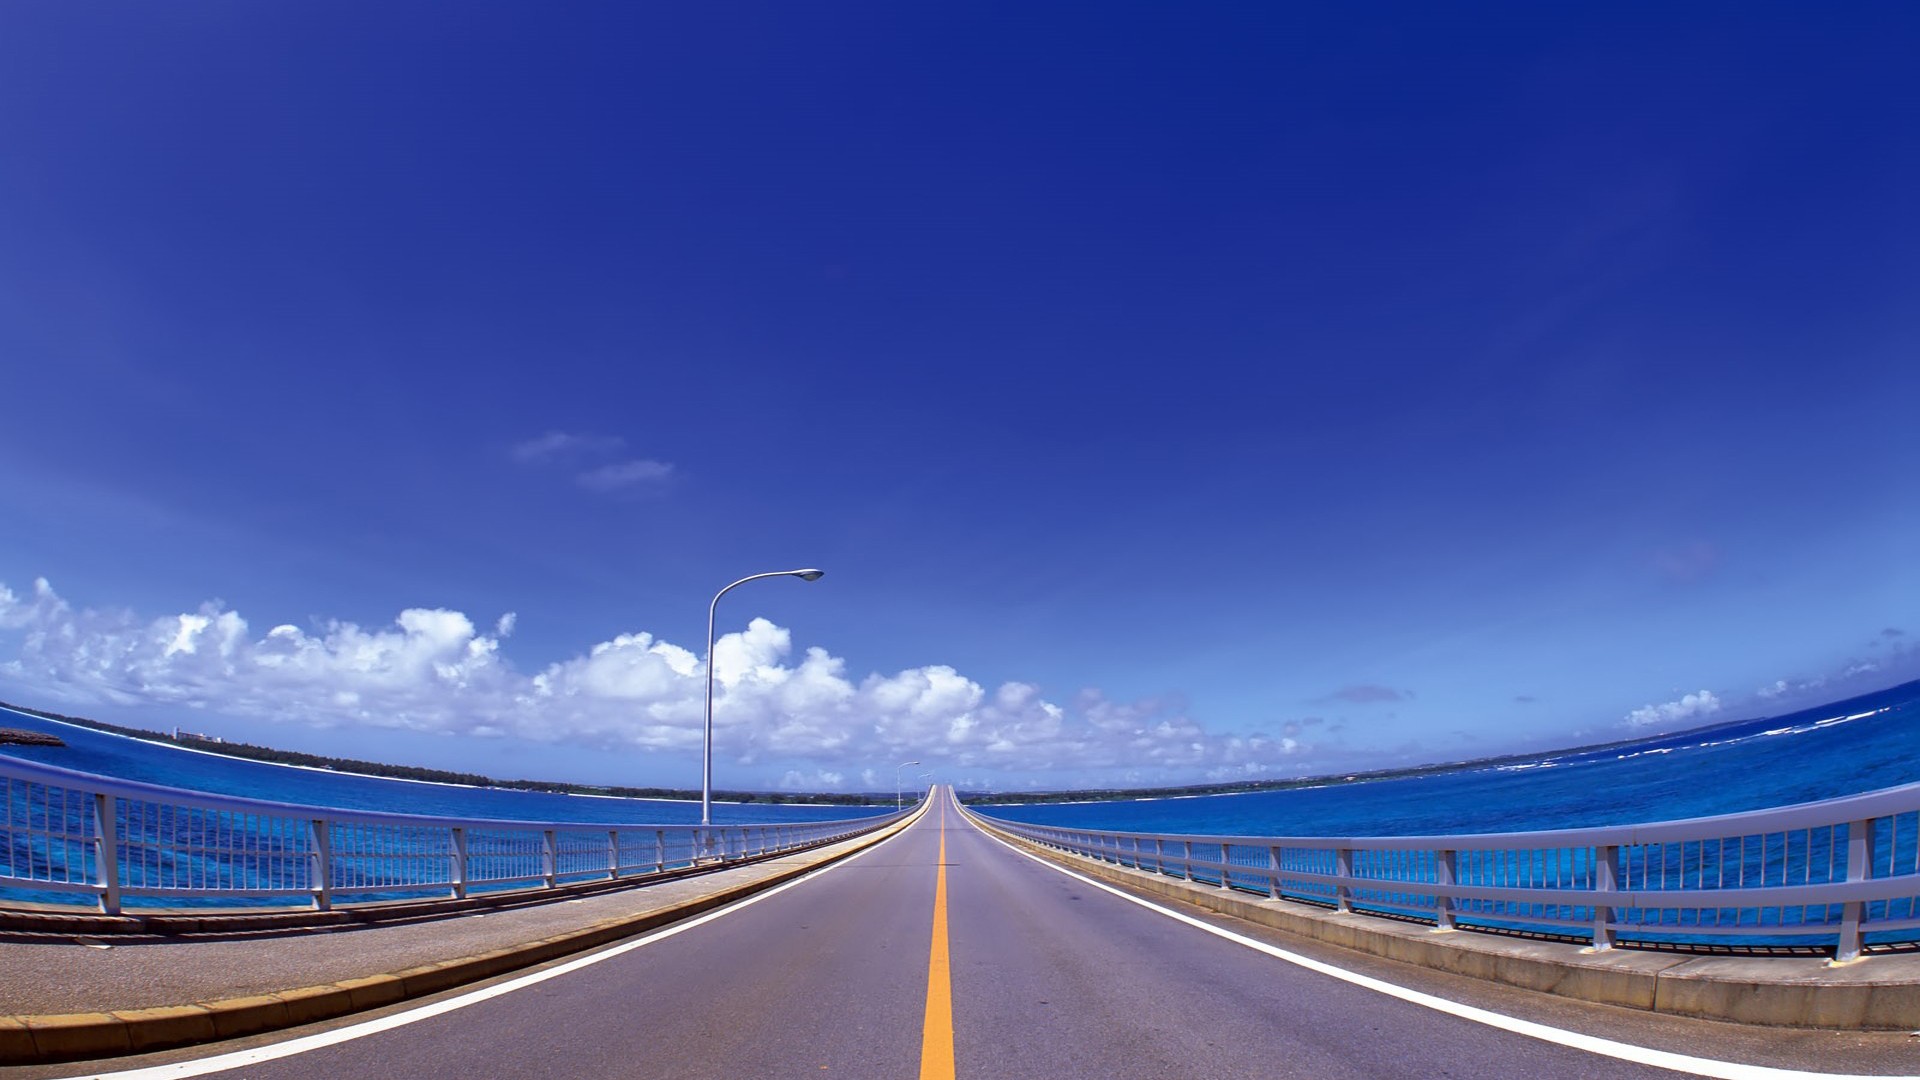 On the road over the sea wallpaper #30334 - Open Walls